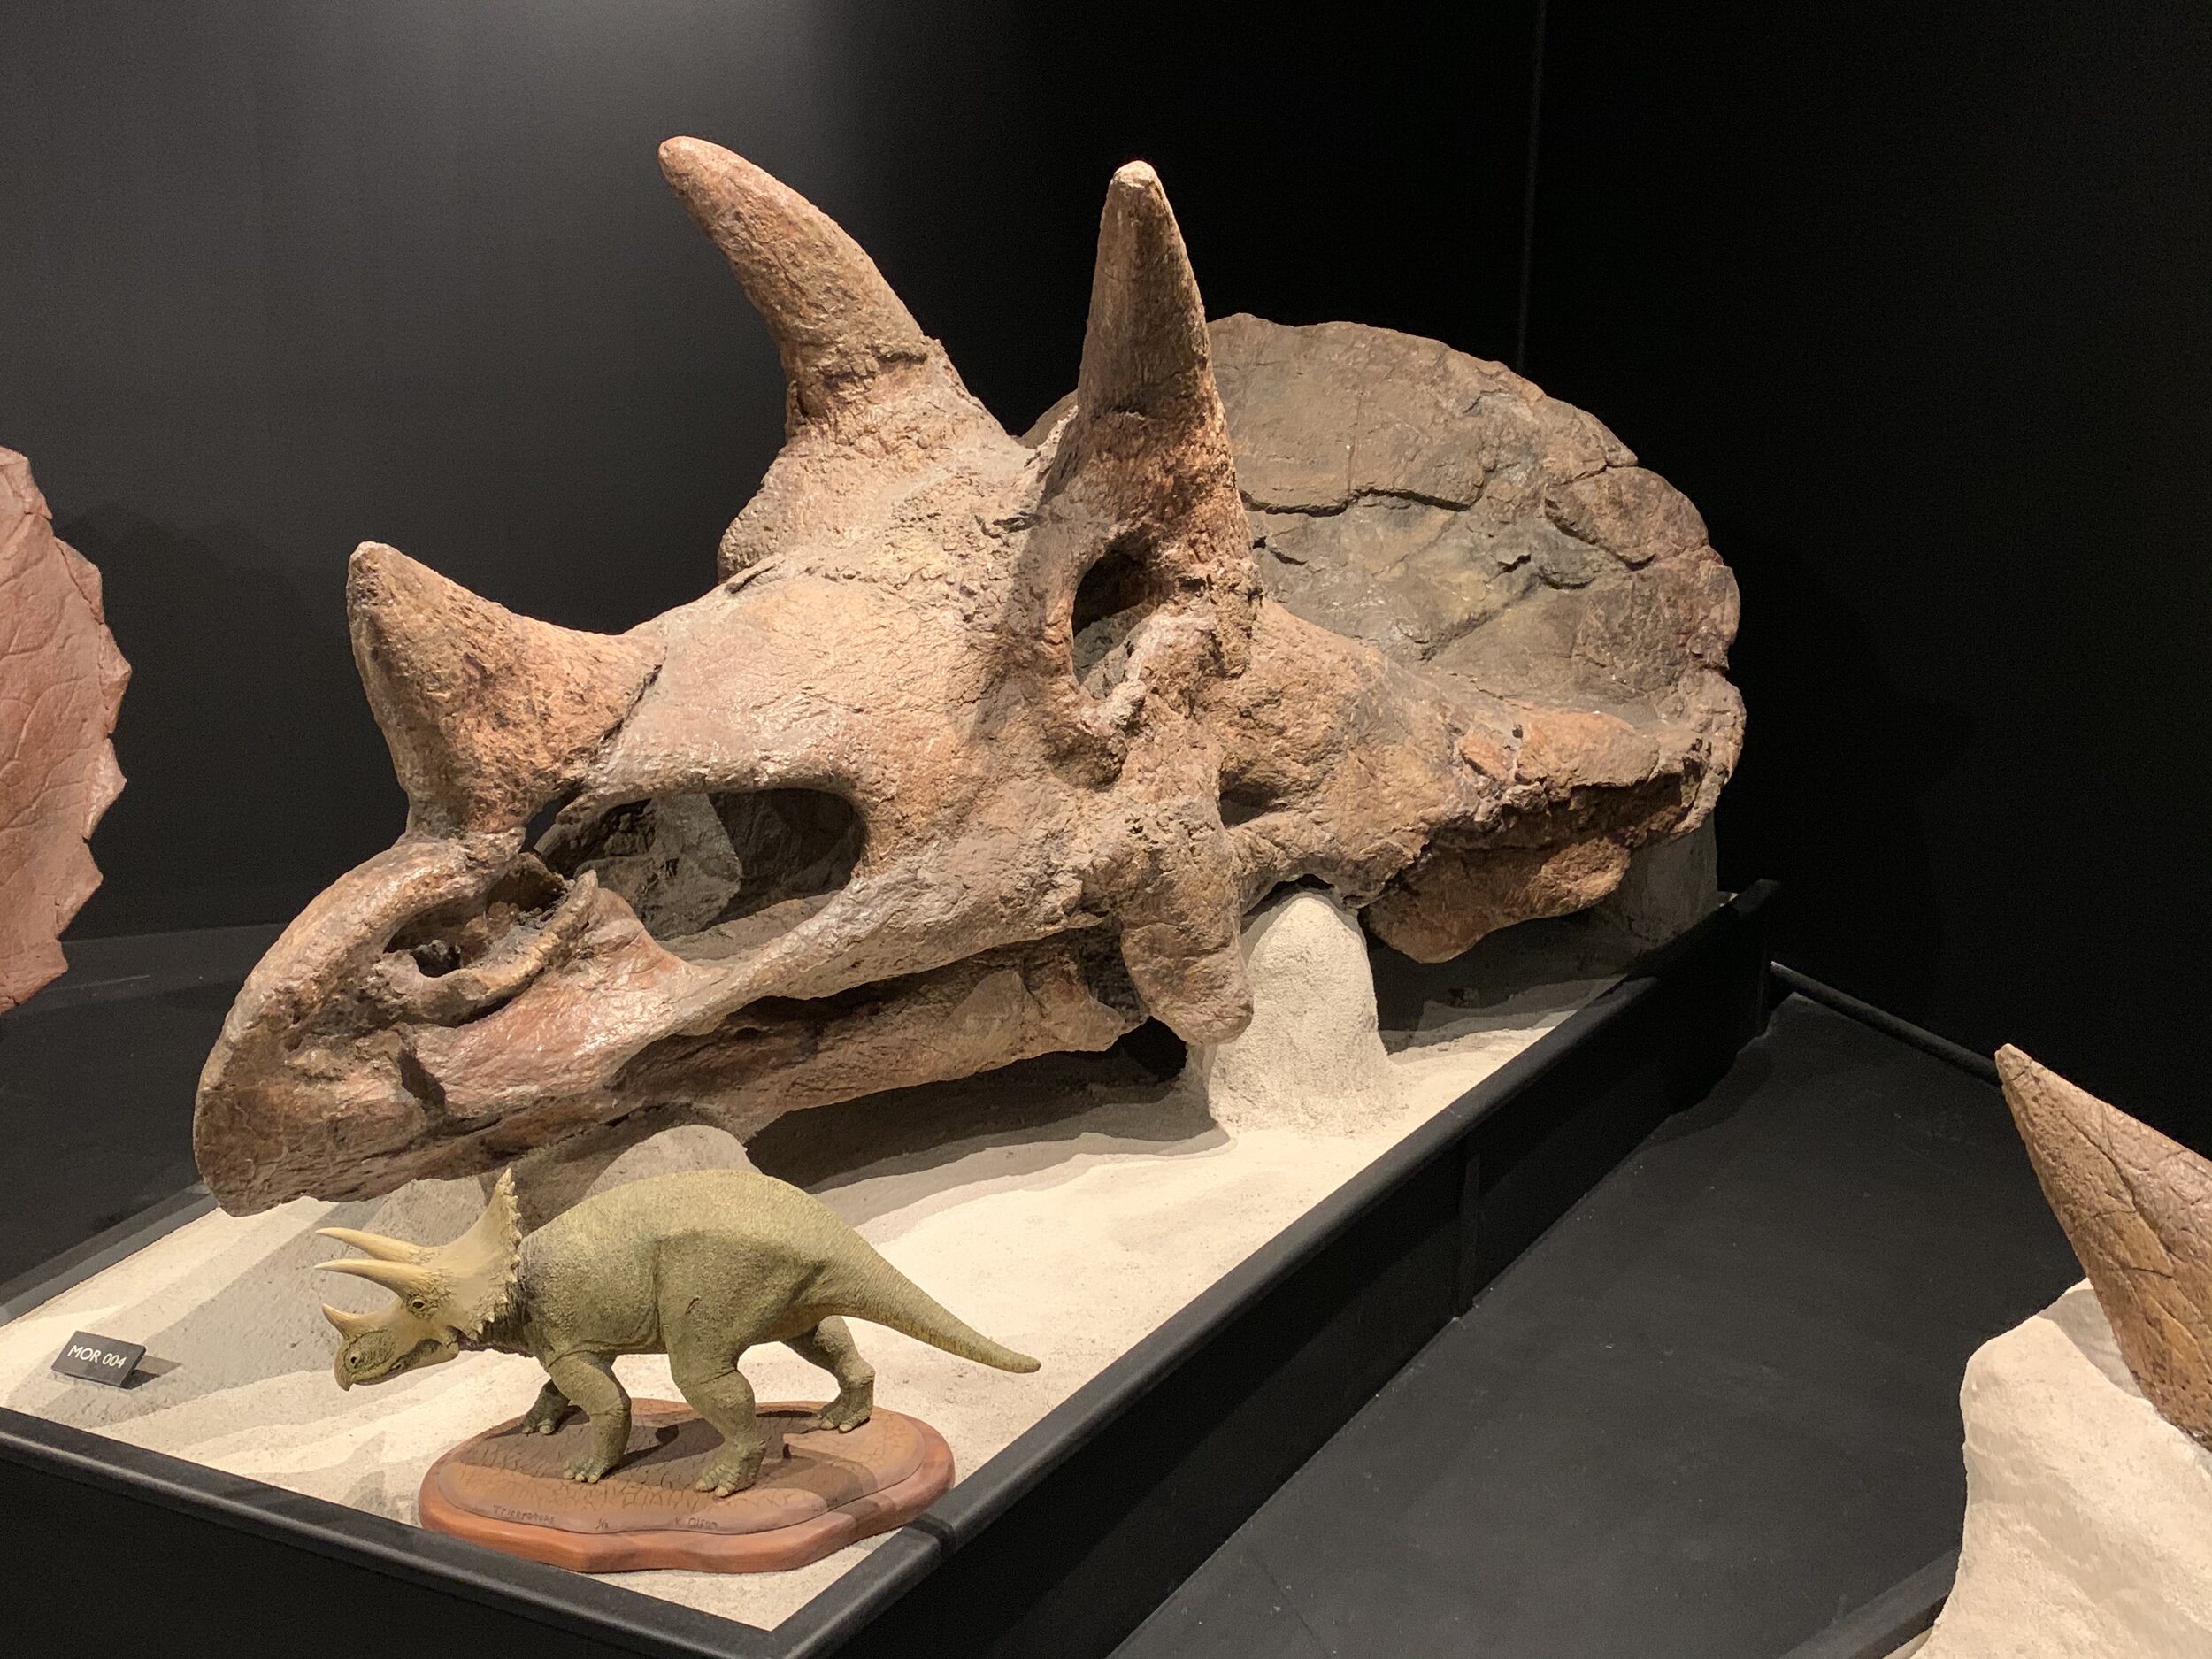  This full adolescent triceratops skull was found in 2017 in Colorado. Sixty-six million years ago. 😲 